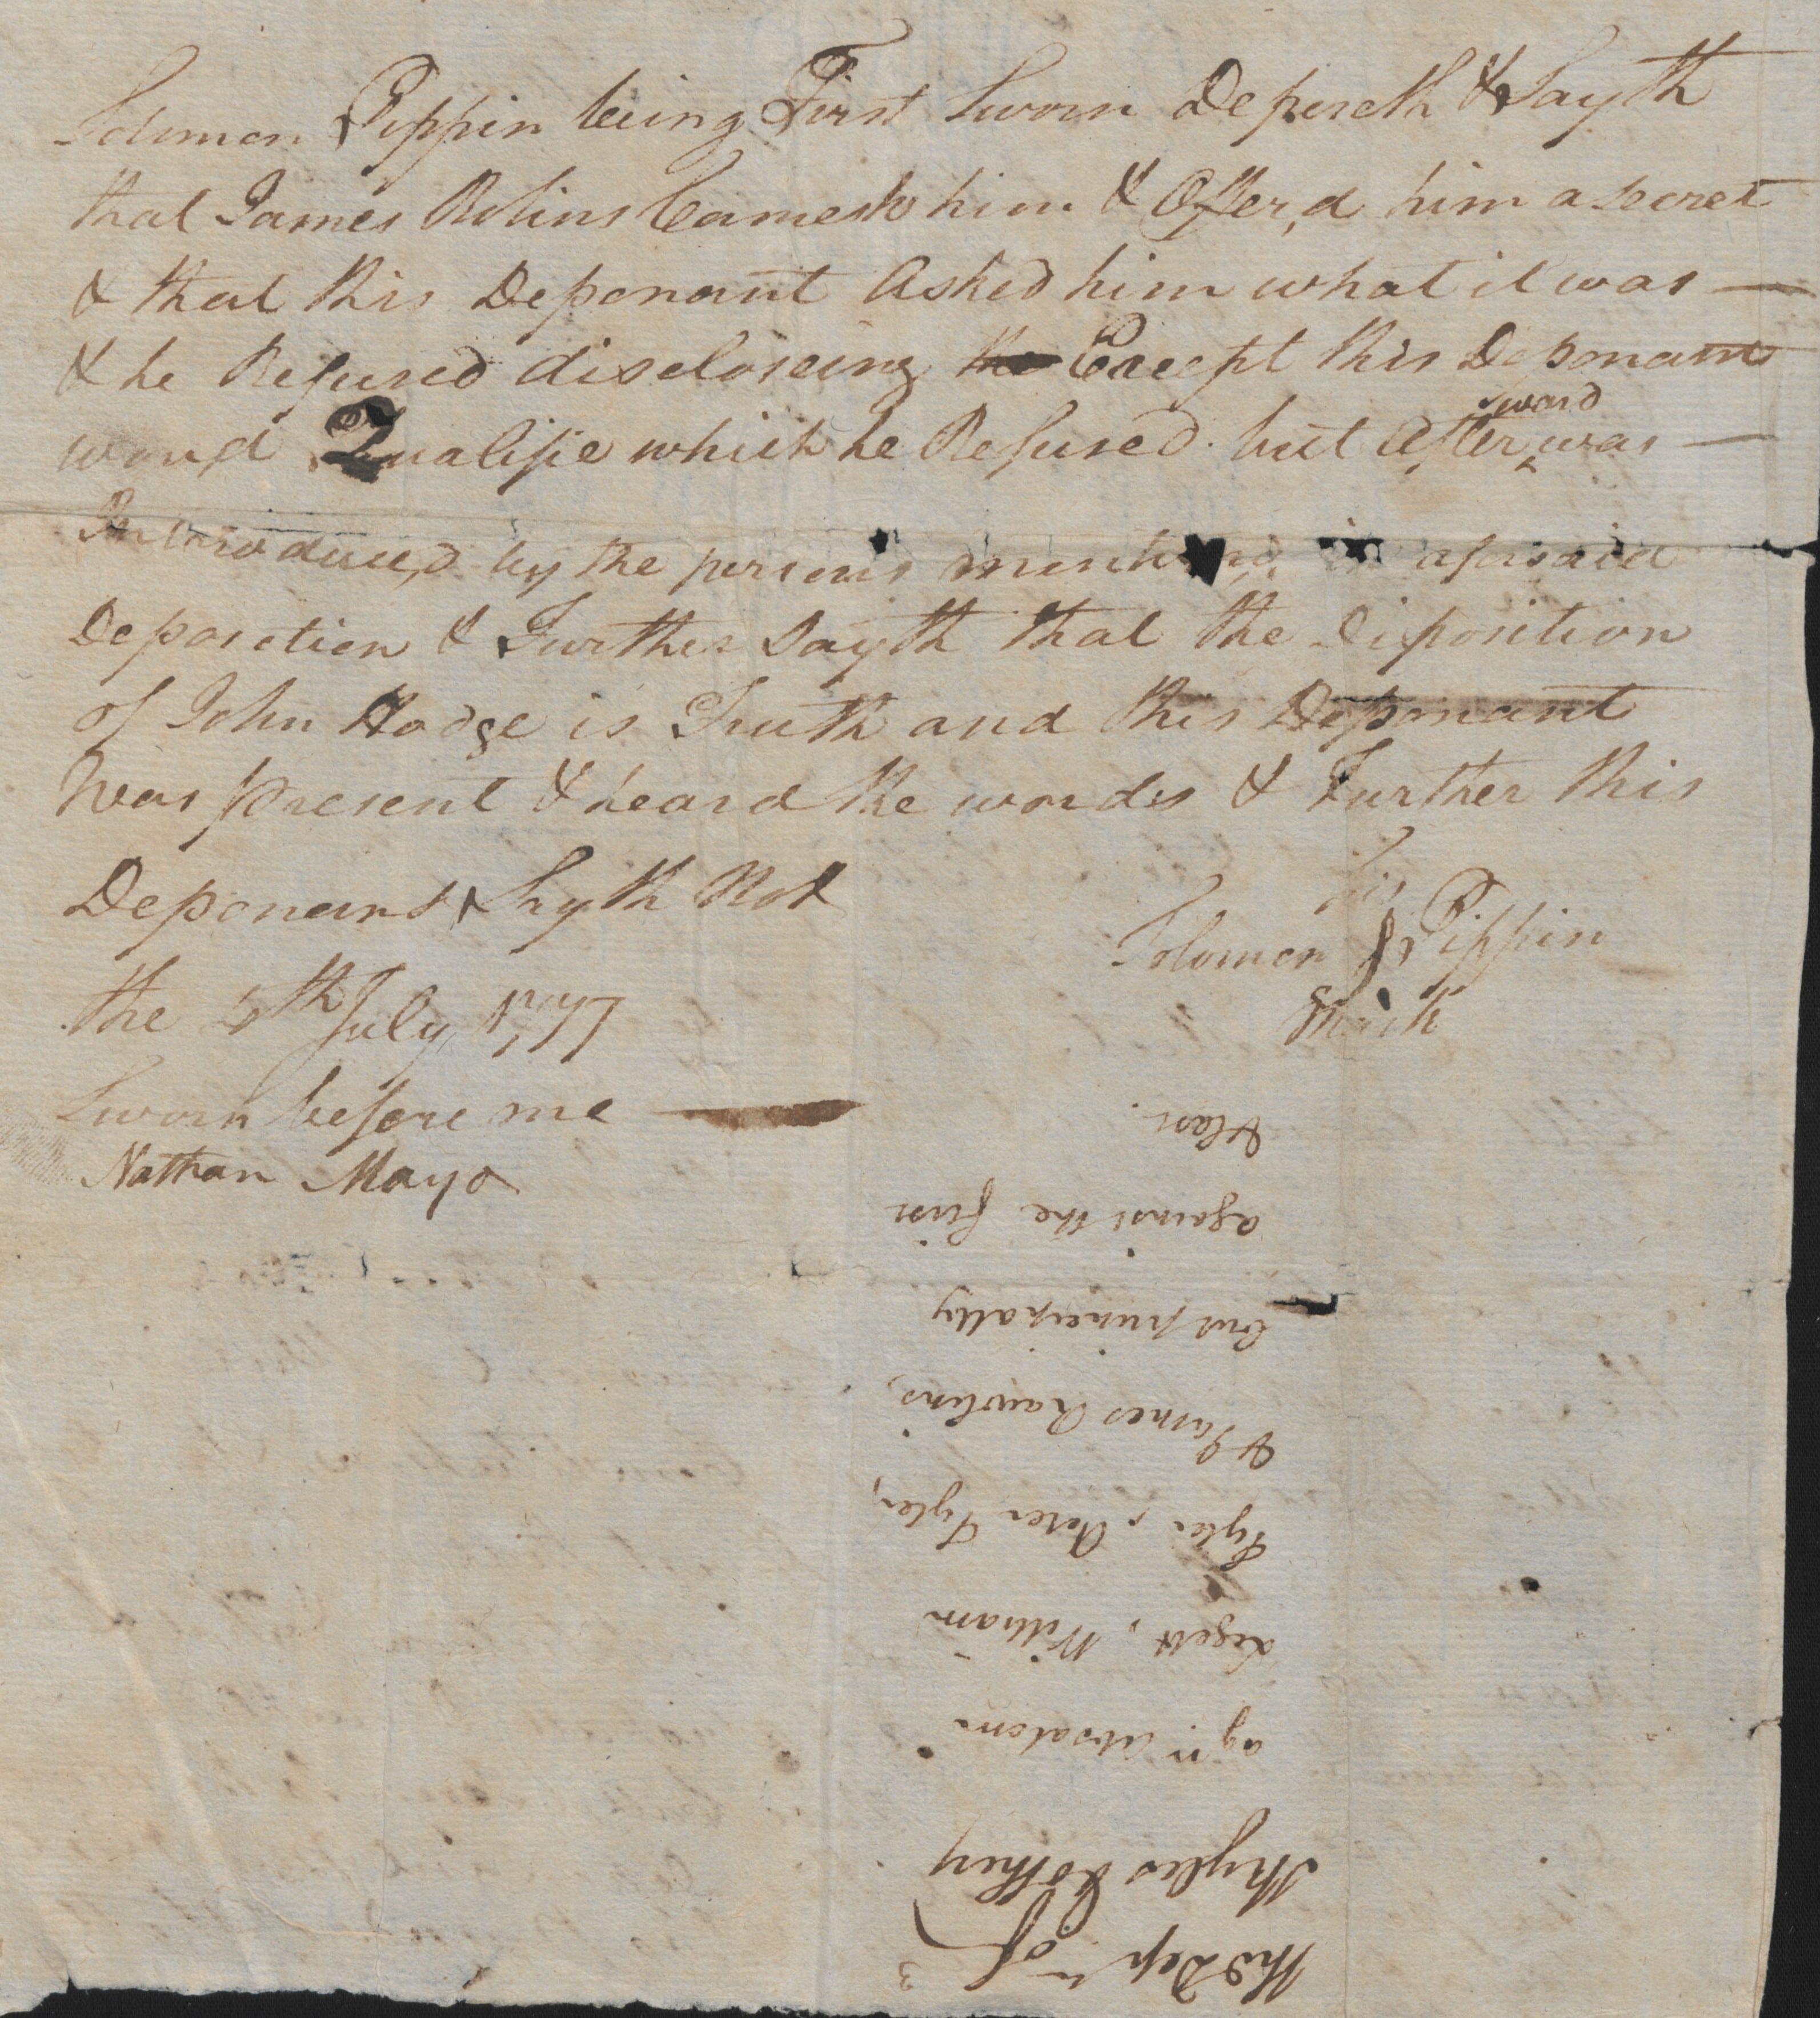 Deposition of Solomon Pippin, 4 July 1777